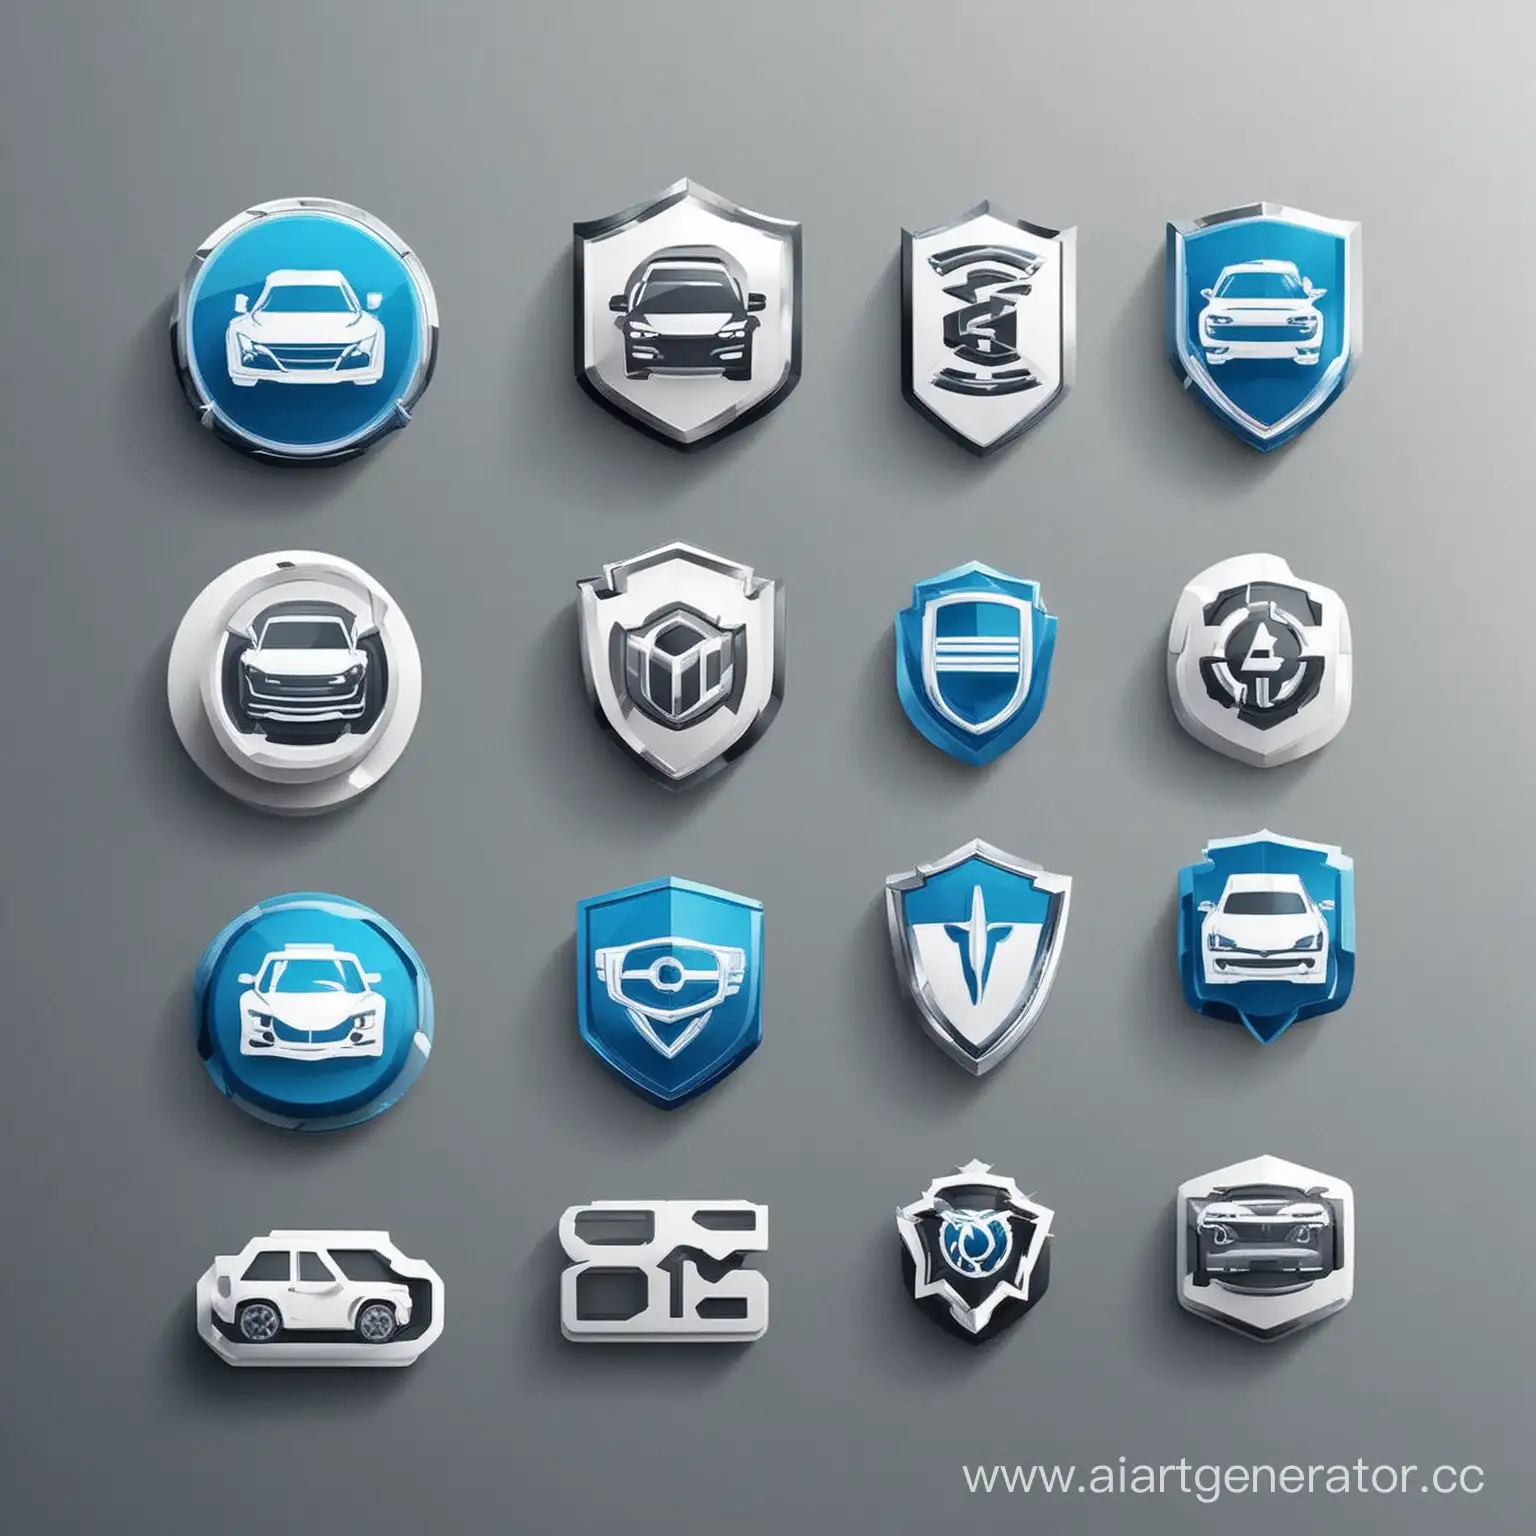 Car-Dealership-Management-Platform-Logo-with-Prominent-Features-and-Prototype-Icons